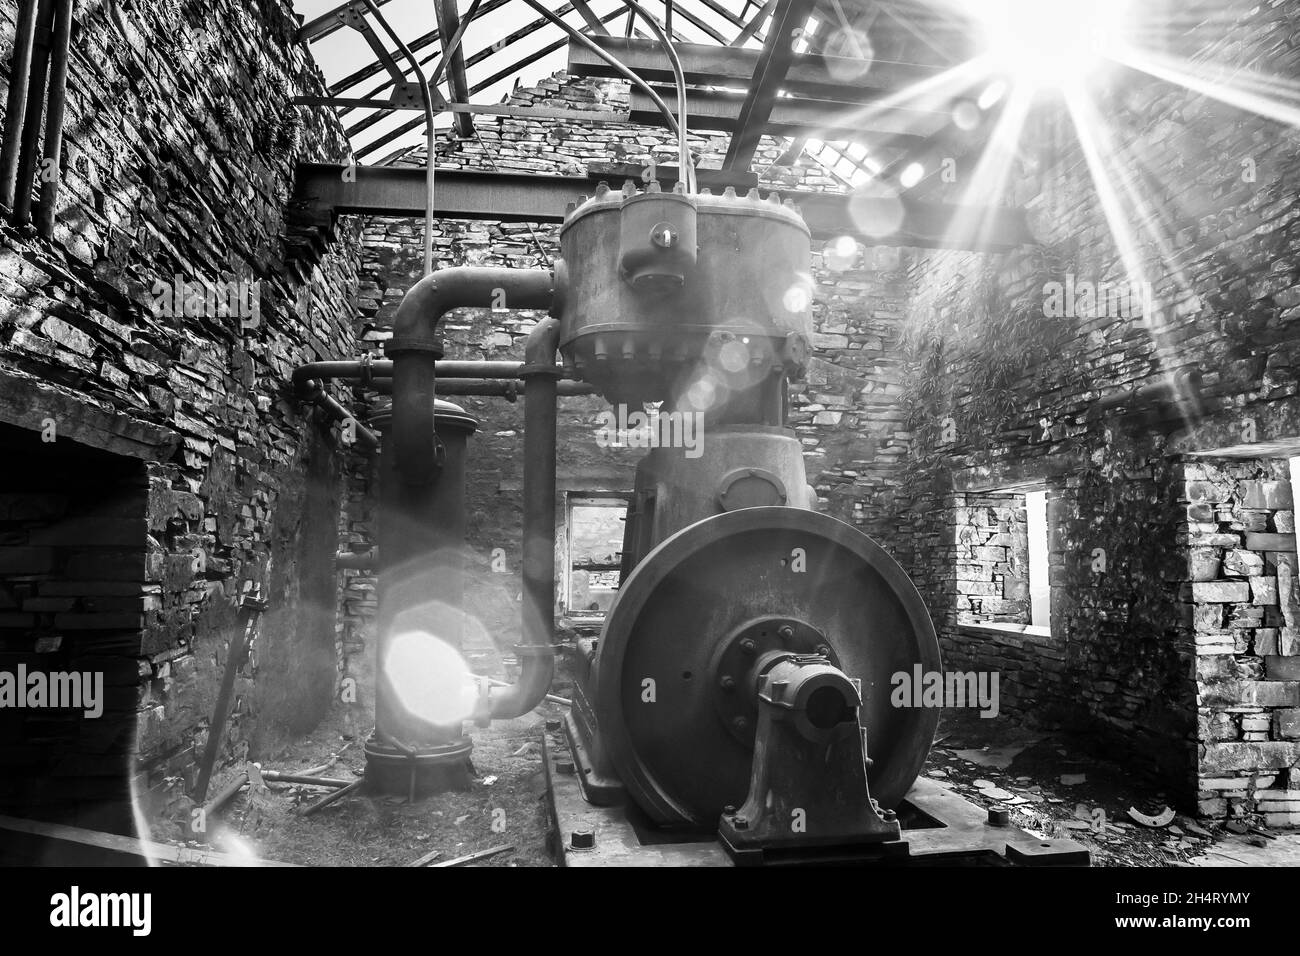 Black and white view of old machinery in derelict, disused slate quarry building, sun streaming through collapsing roof. Stock Photo